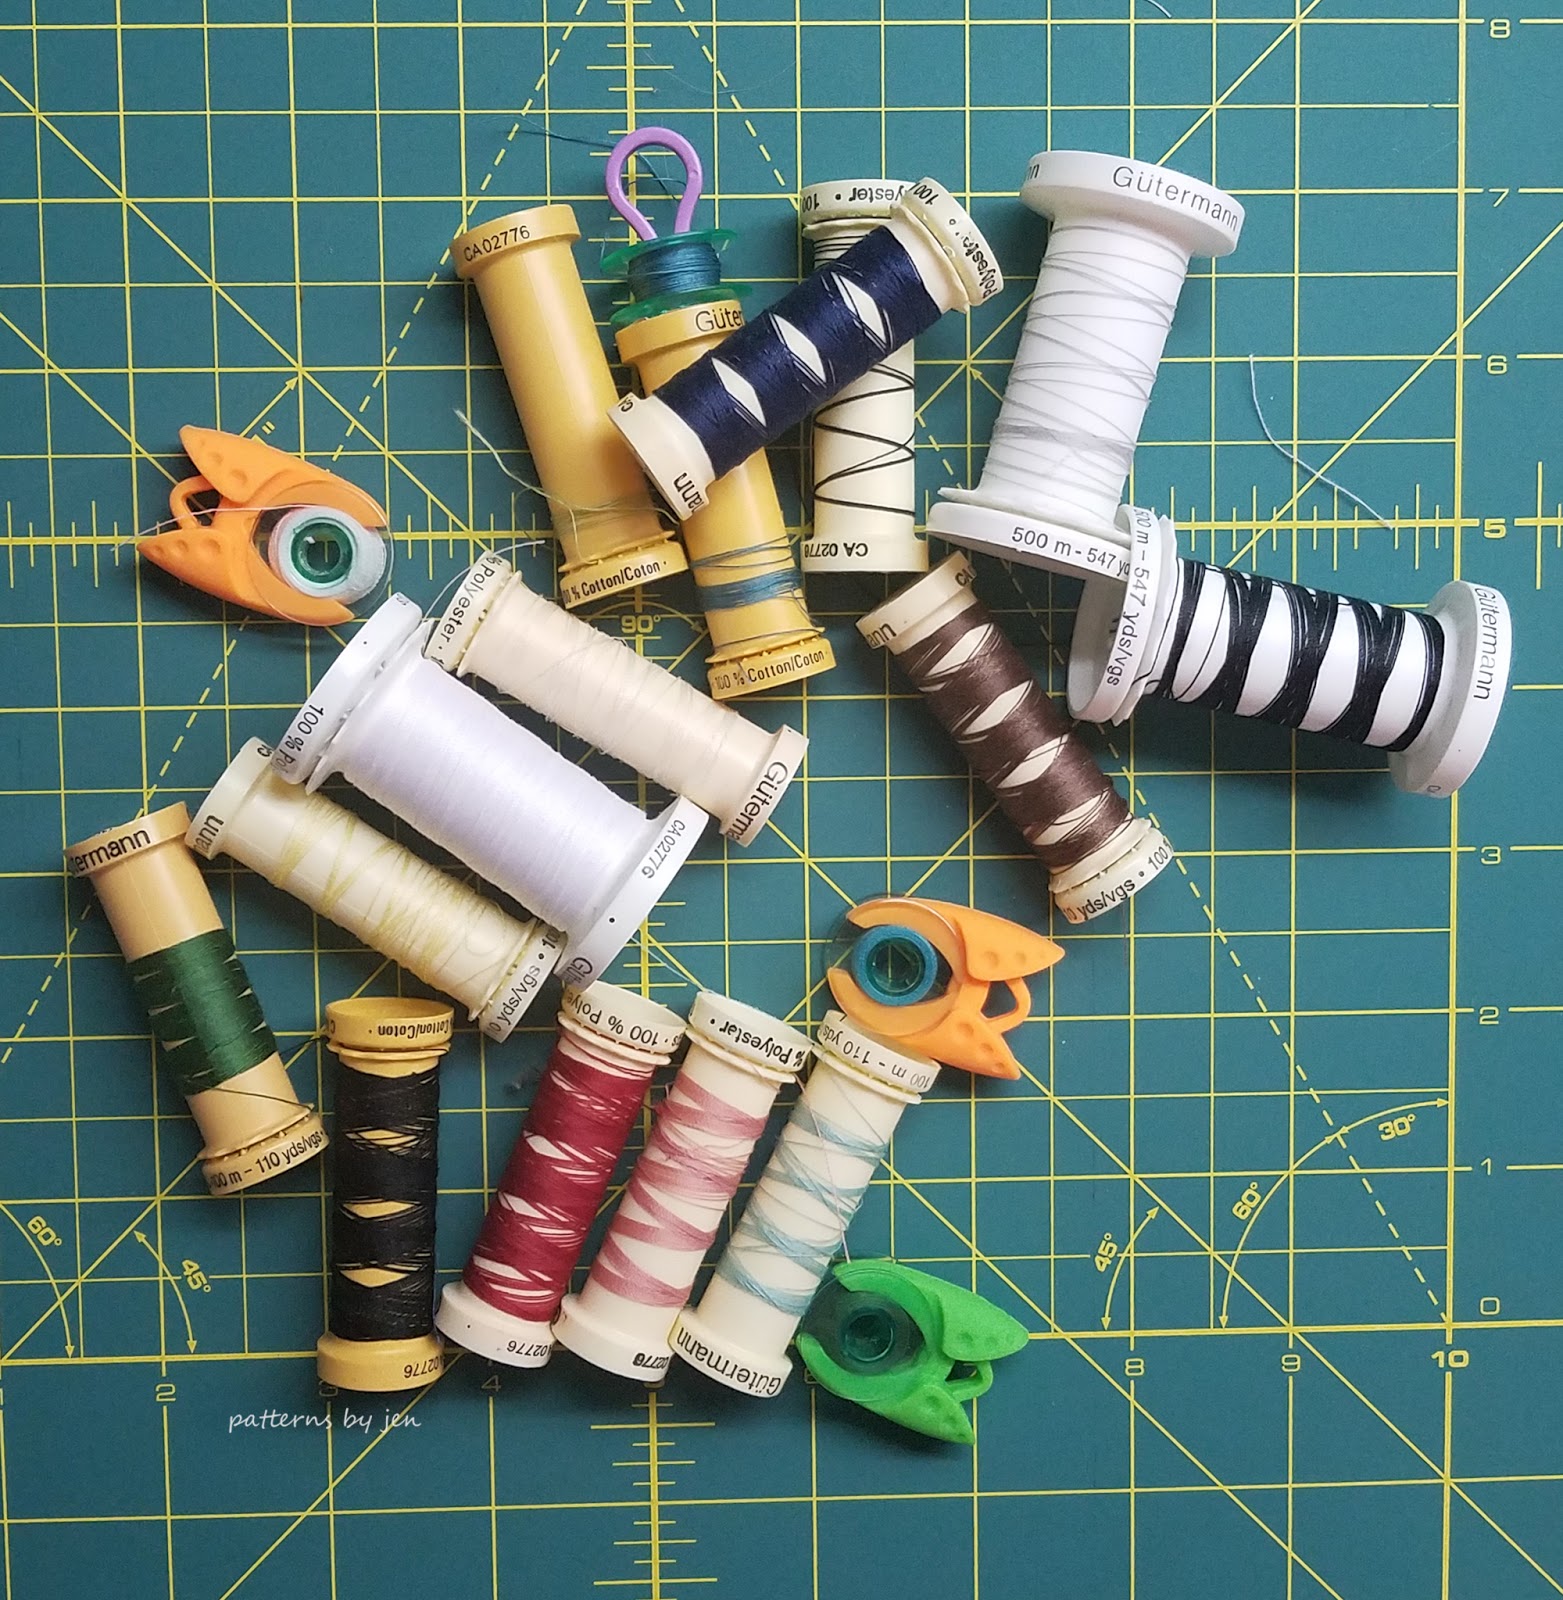 My husband made me a 100 thread spool and bobbin holder for my